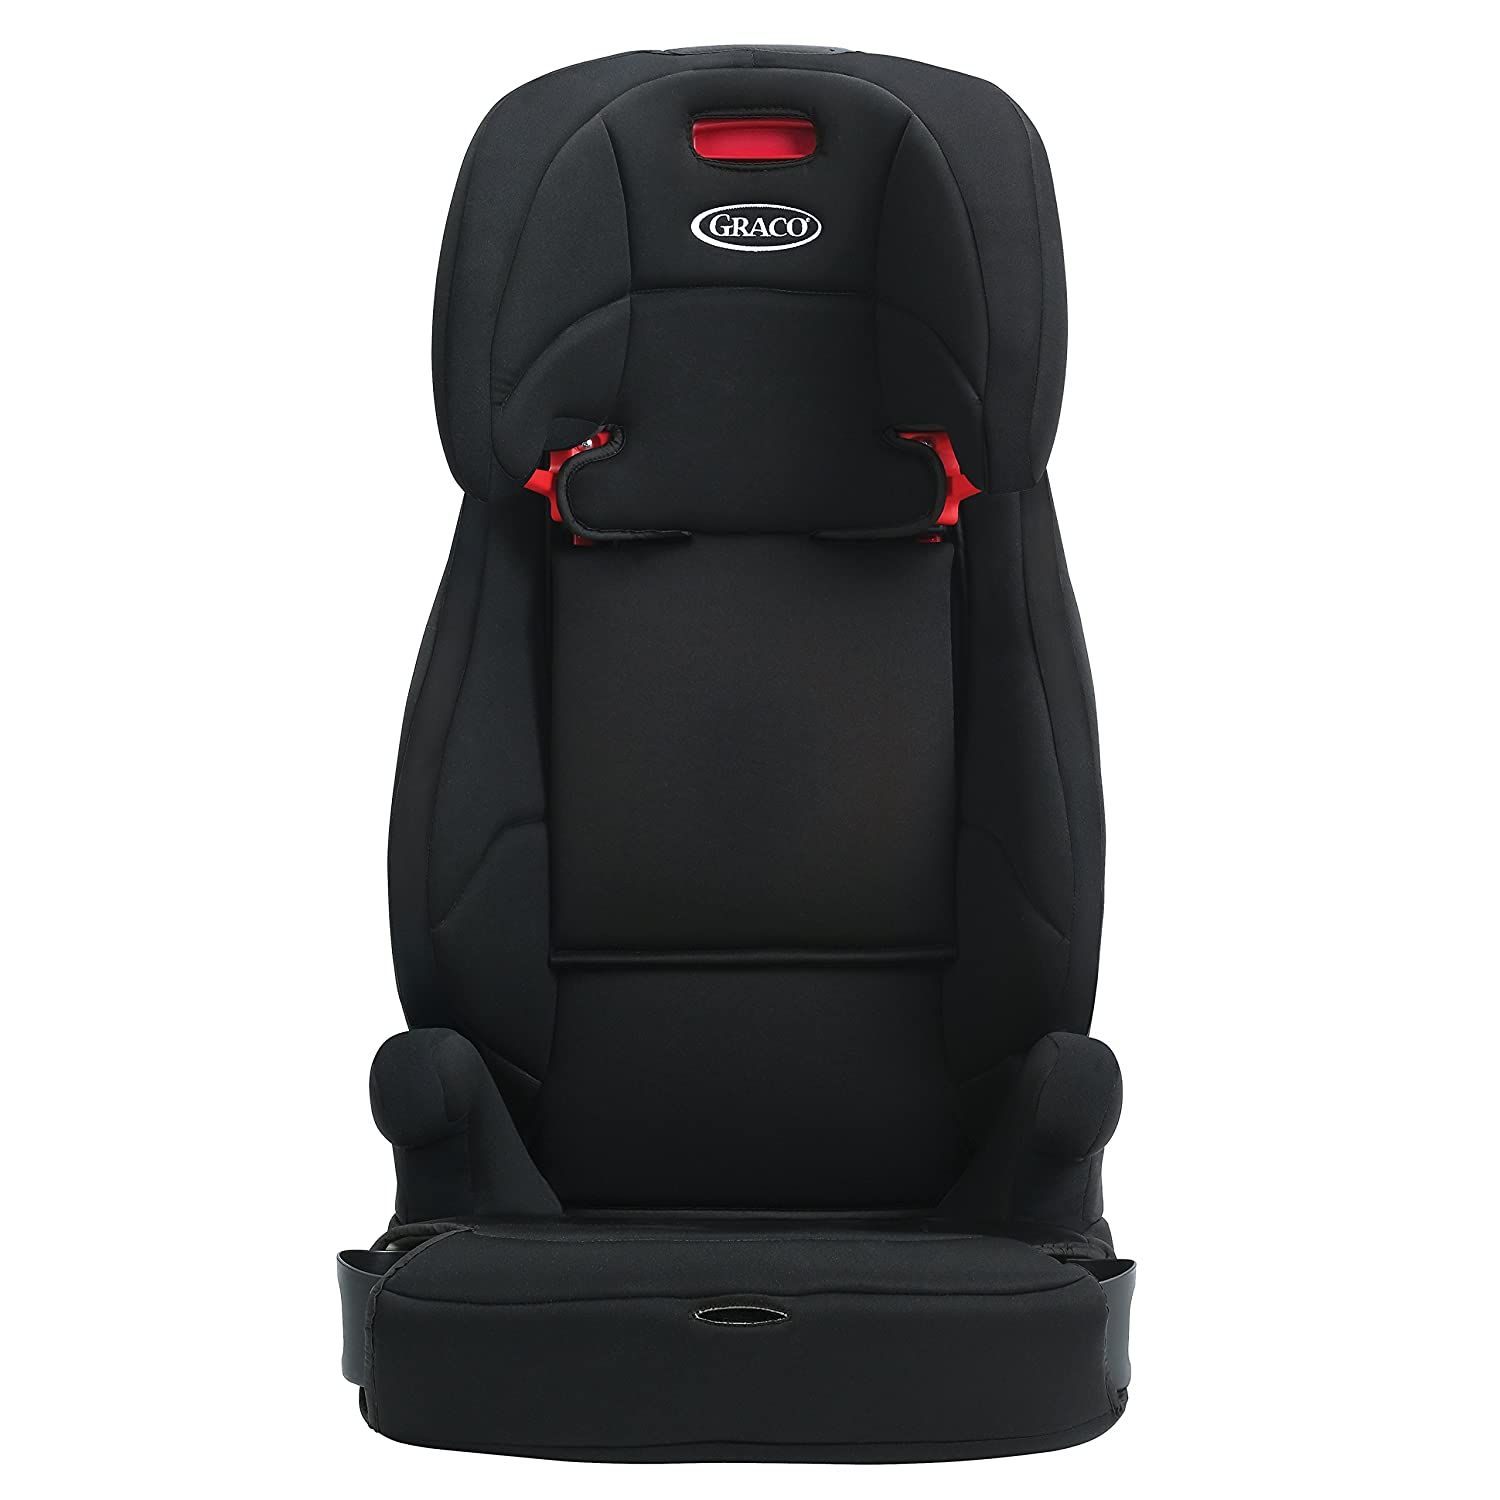 The Best Toddler Car Seats